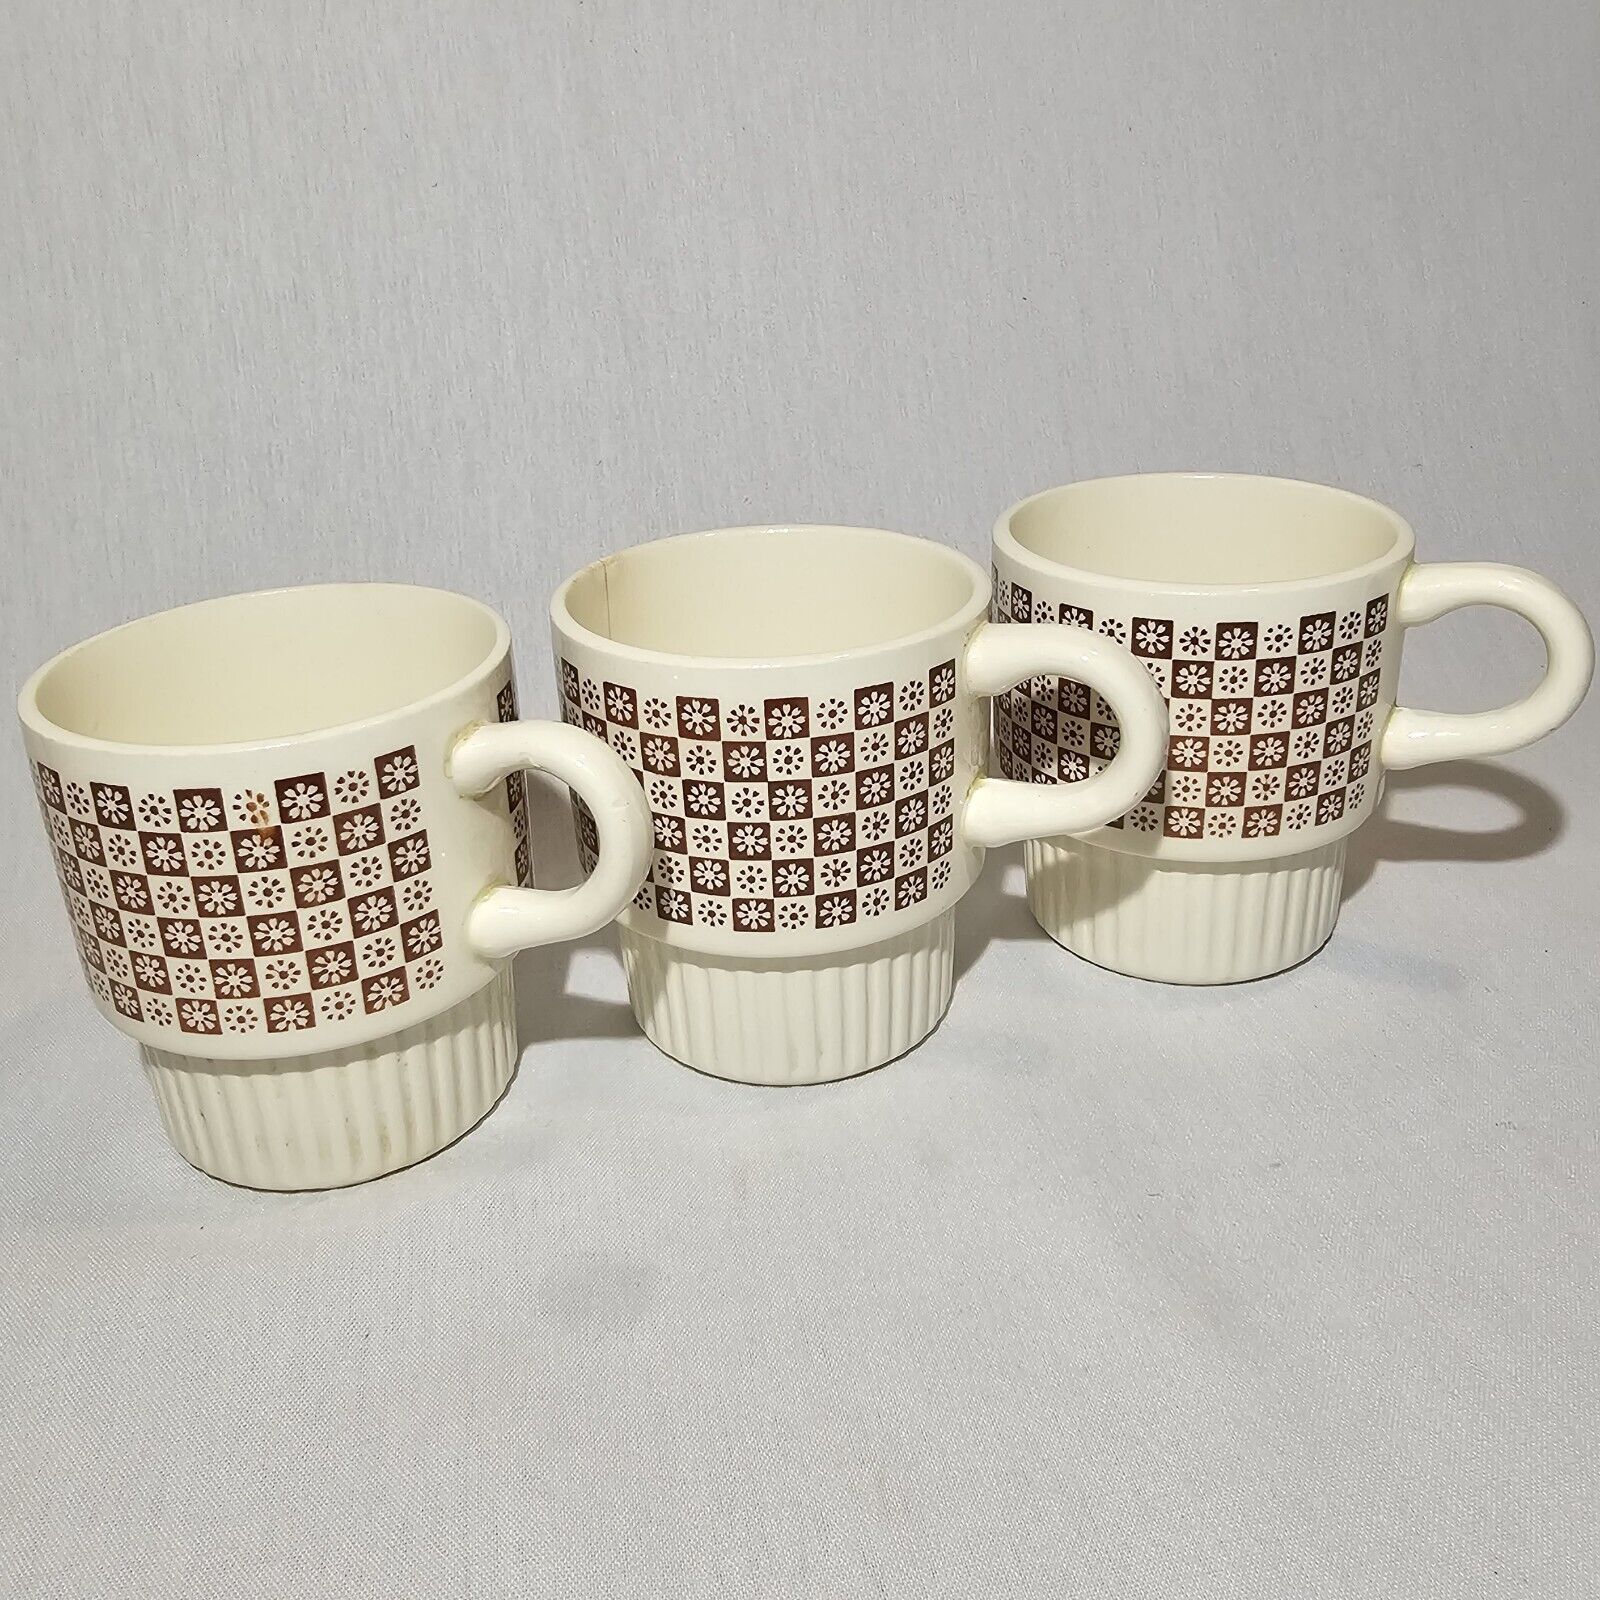 2 Vintage Checkered Daisy McCoy Stackable Retro Coffee Cup Mug USA+ Cracked Cup